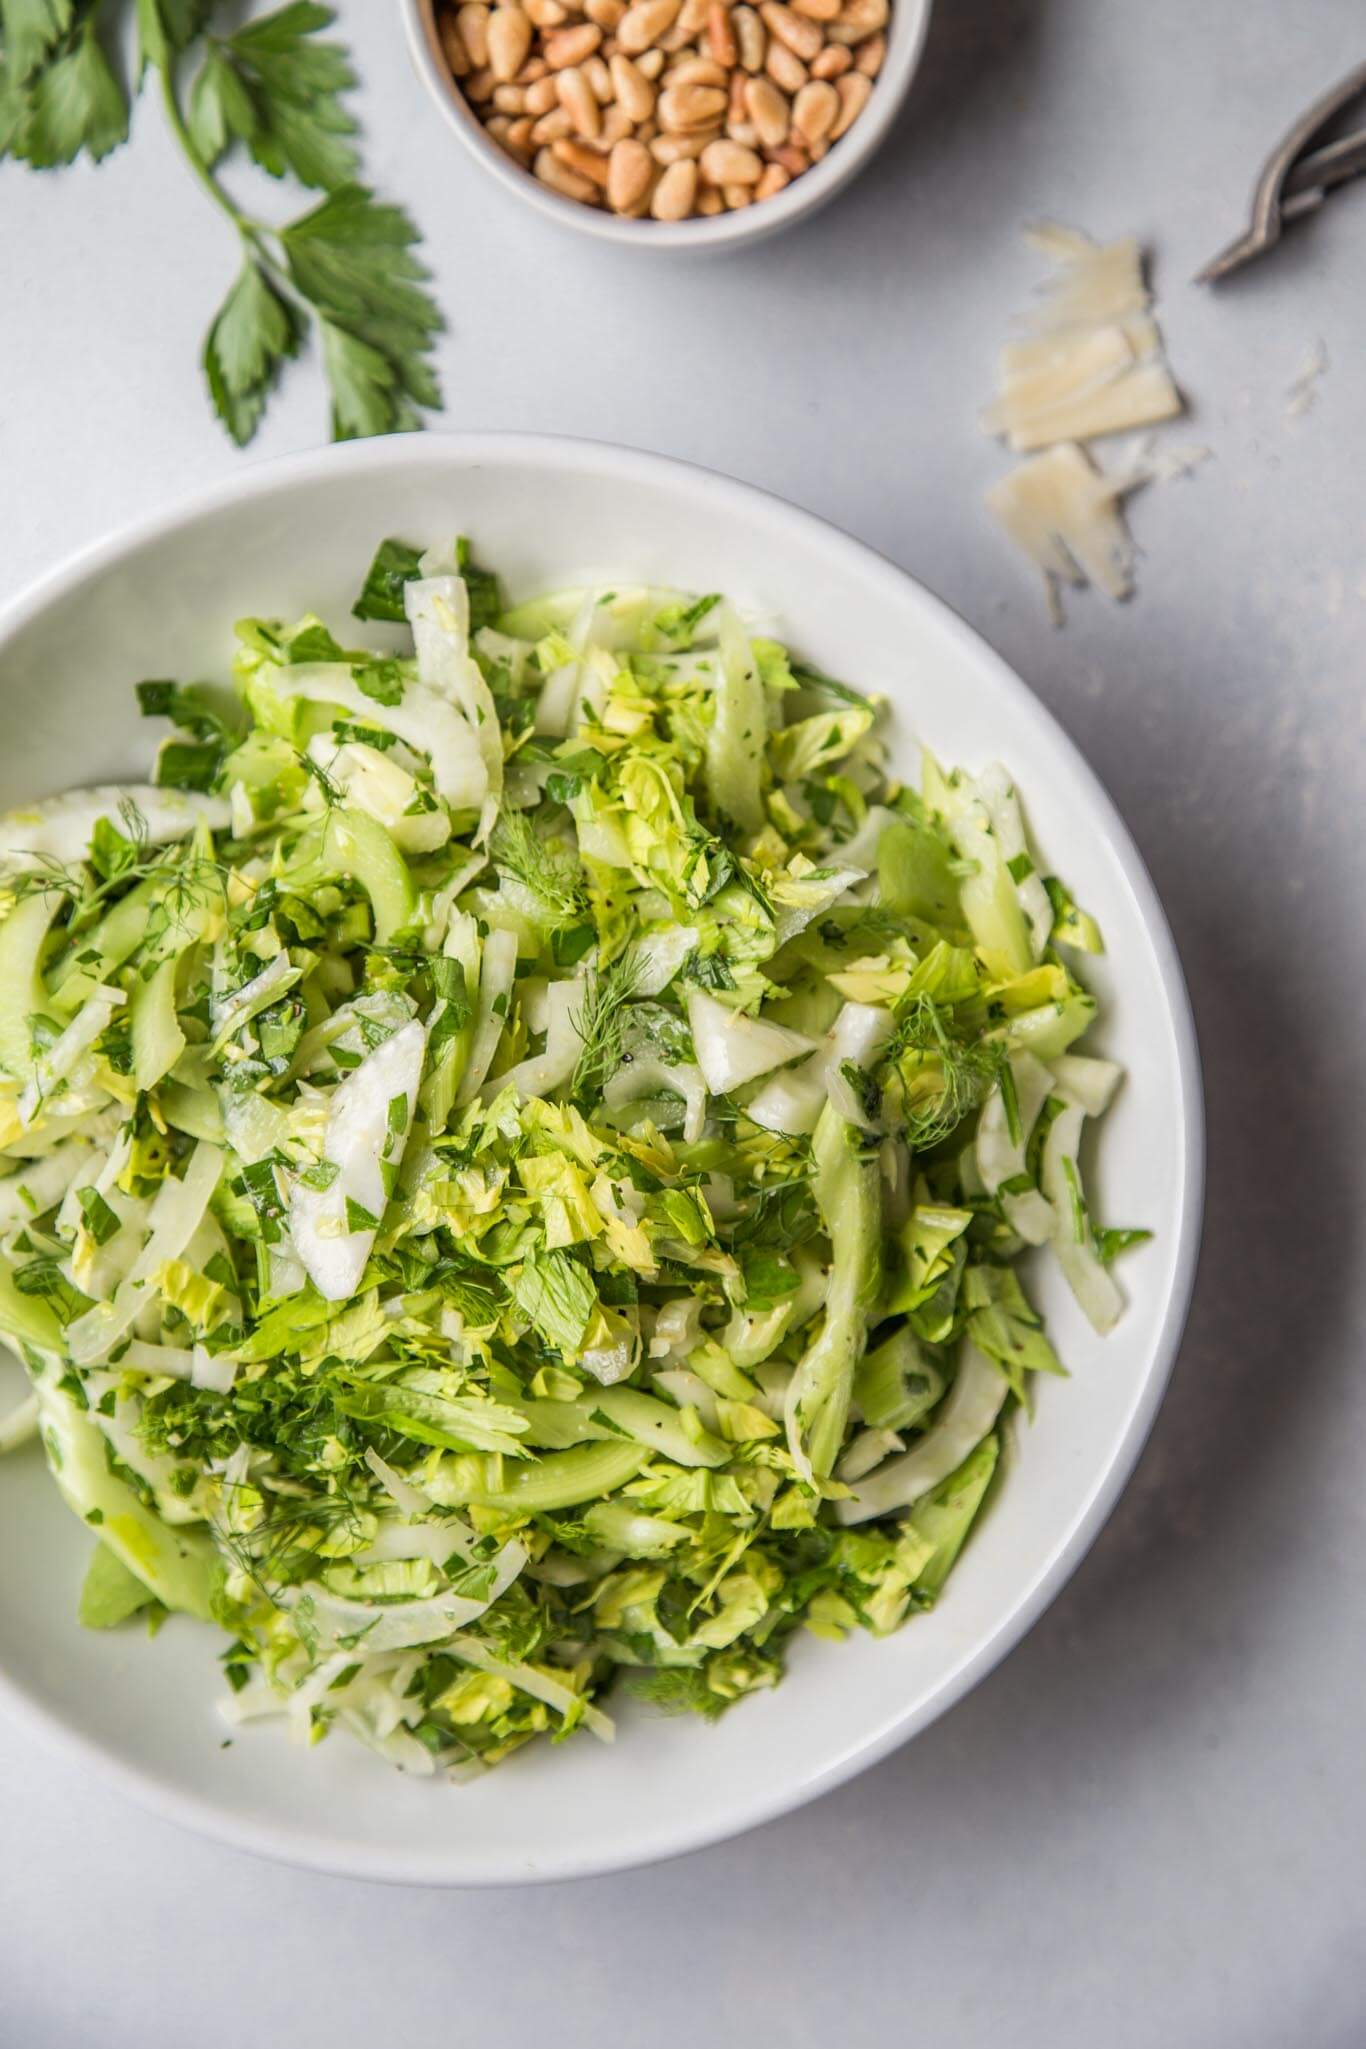 fennel and celery salad ready to be dresed